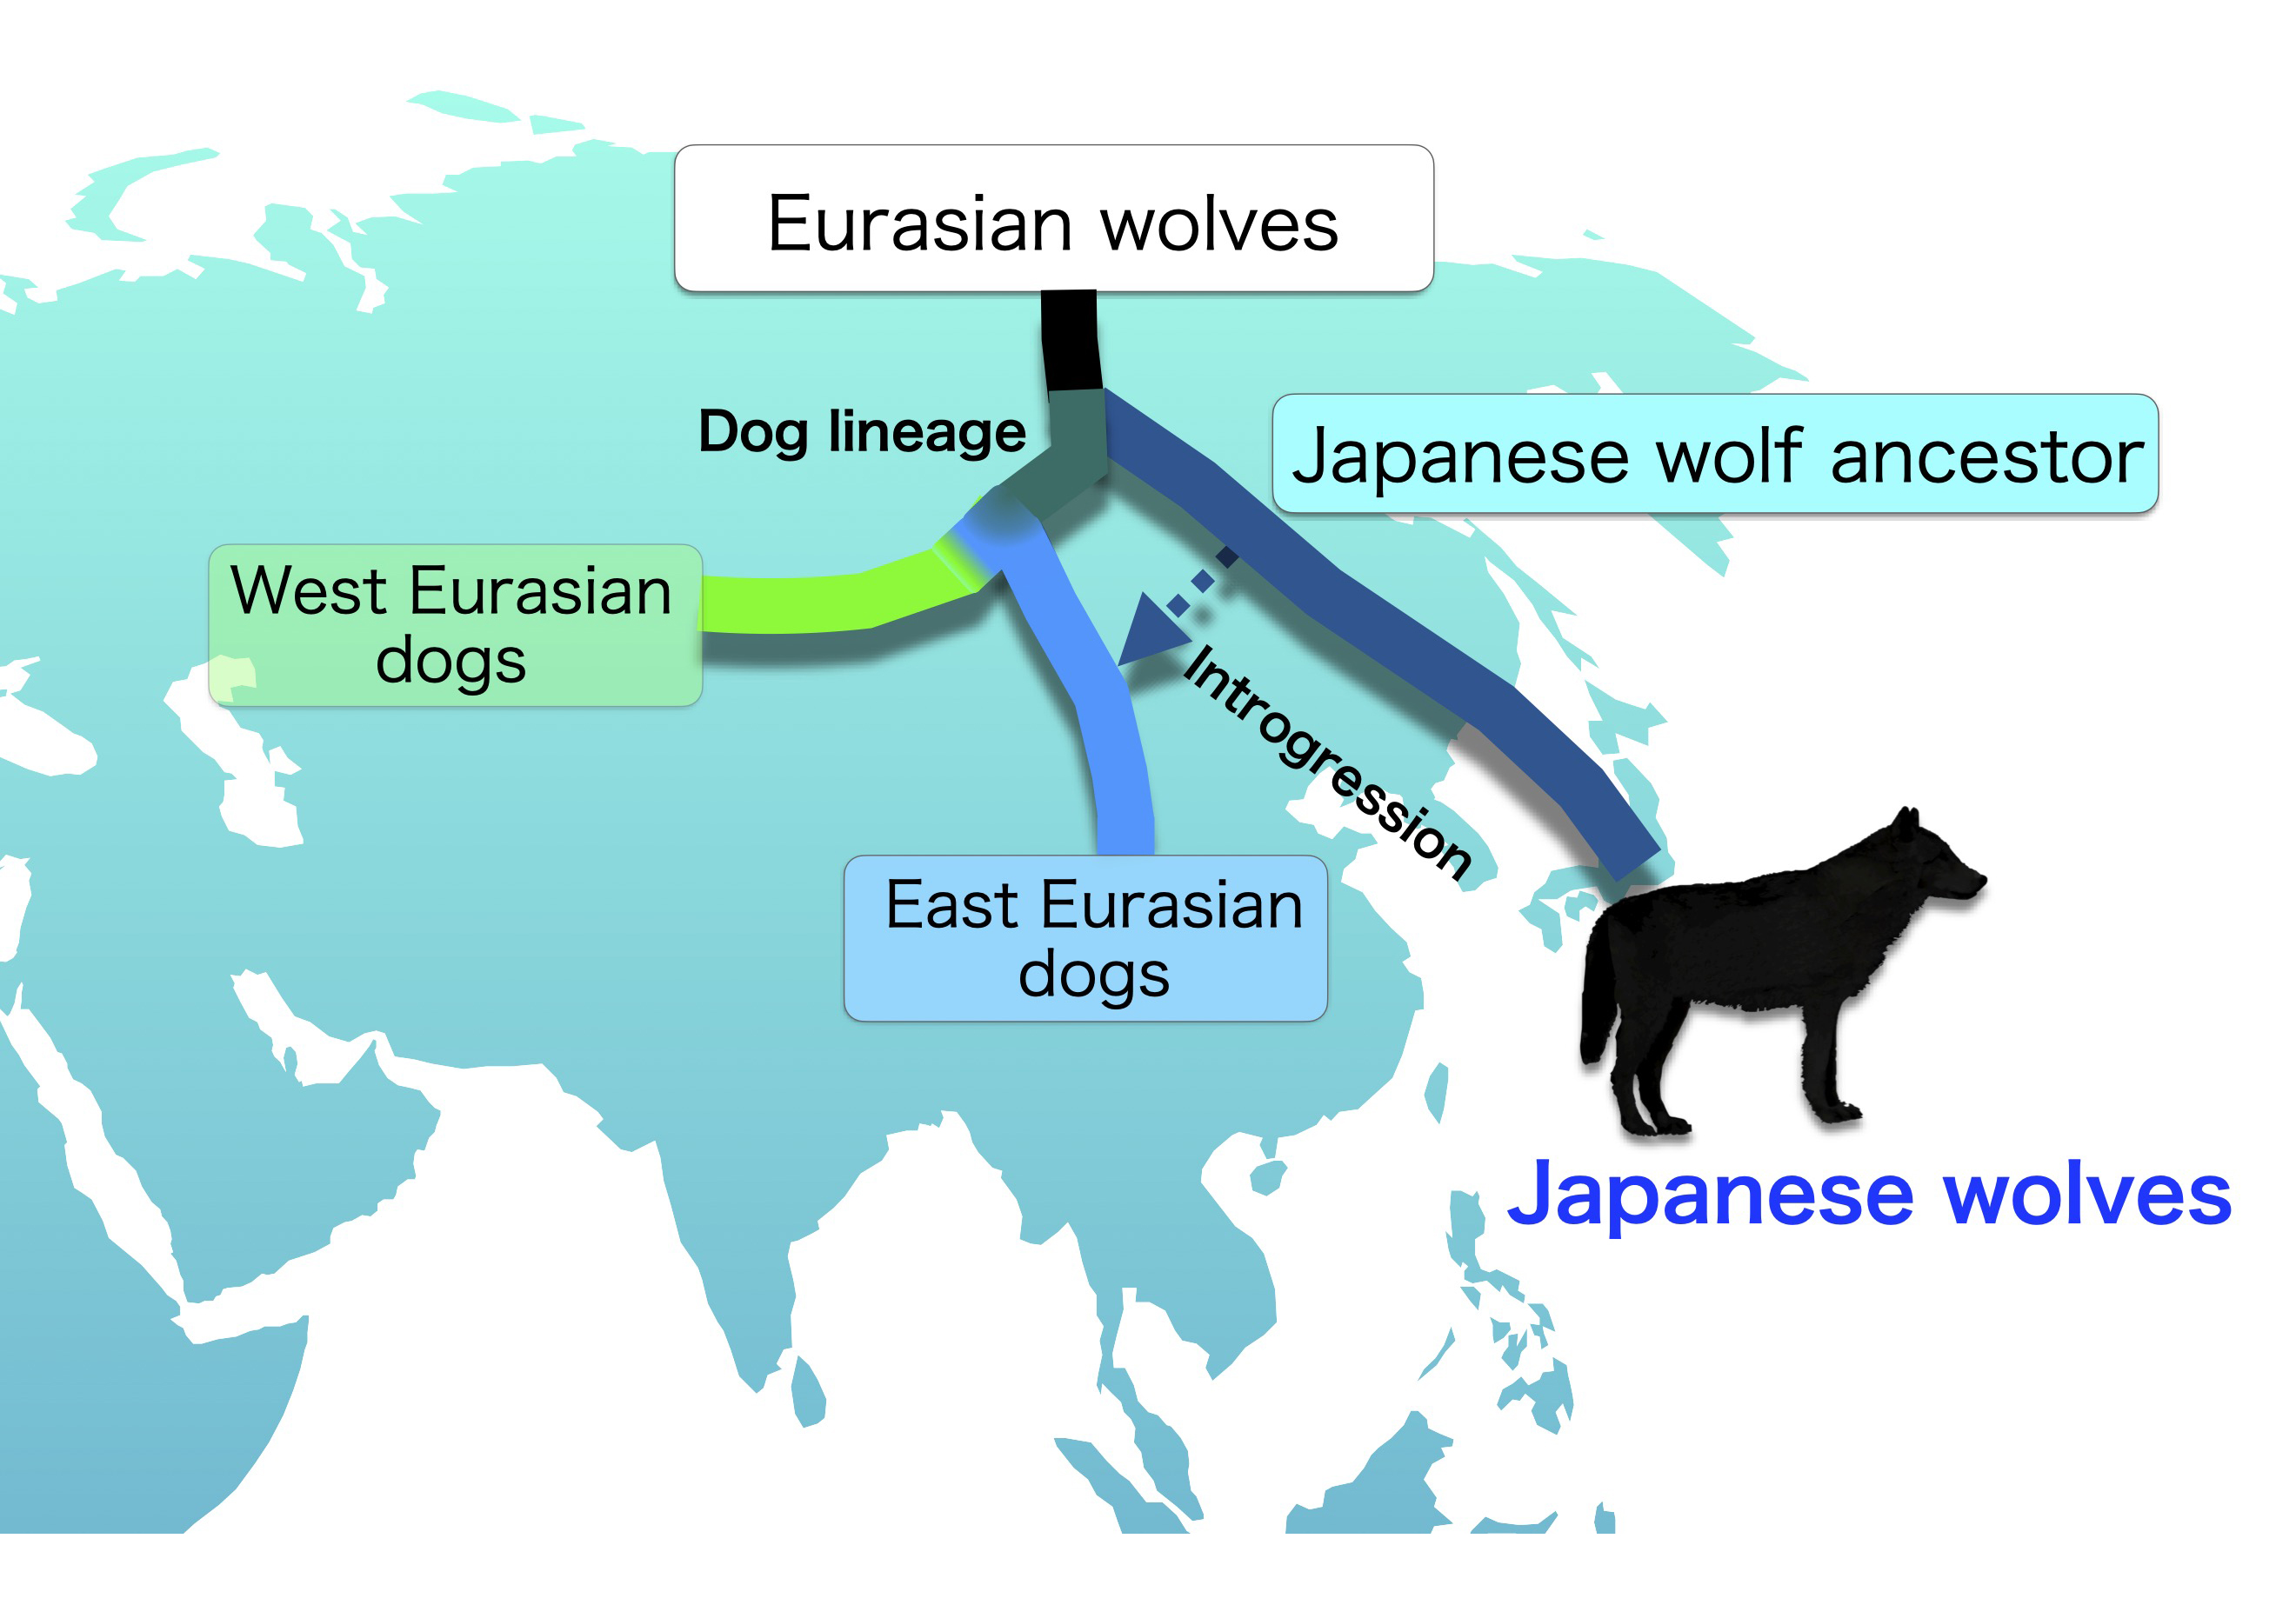 Japanese wolves are most closely related to dogs and share DNA with East Eurasian dogs